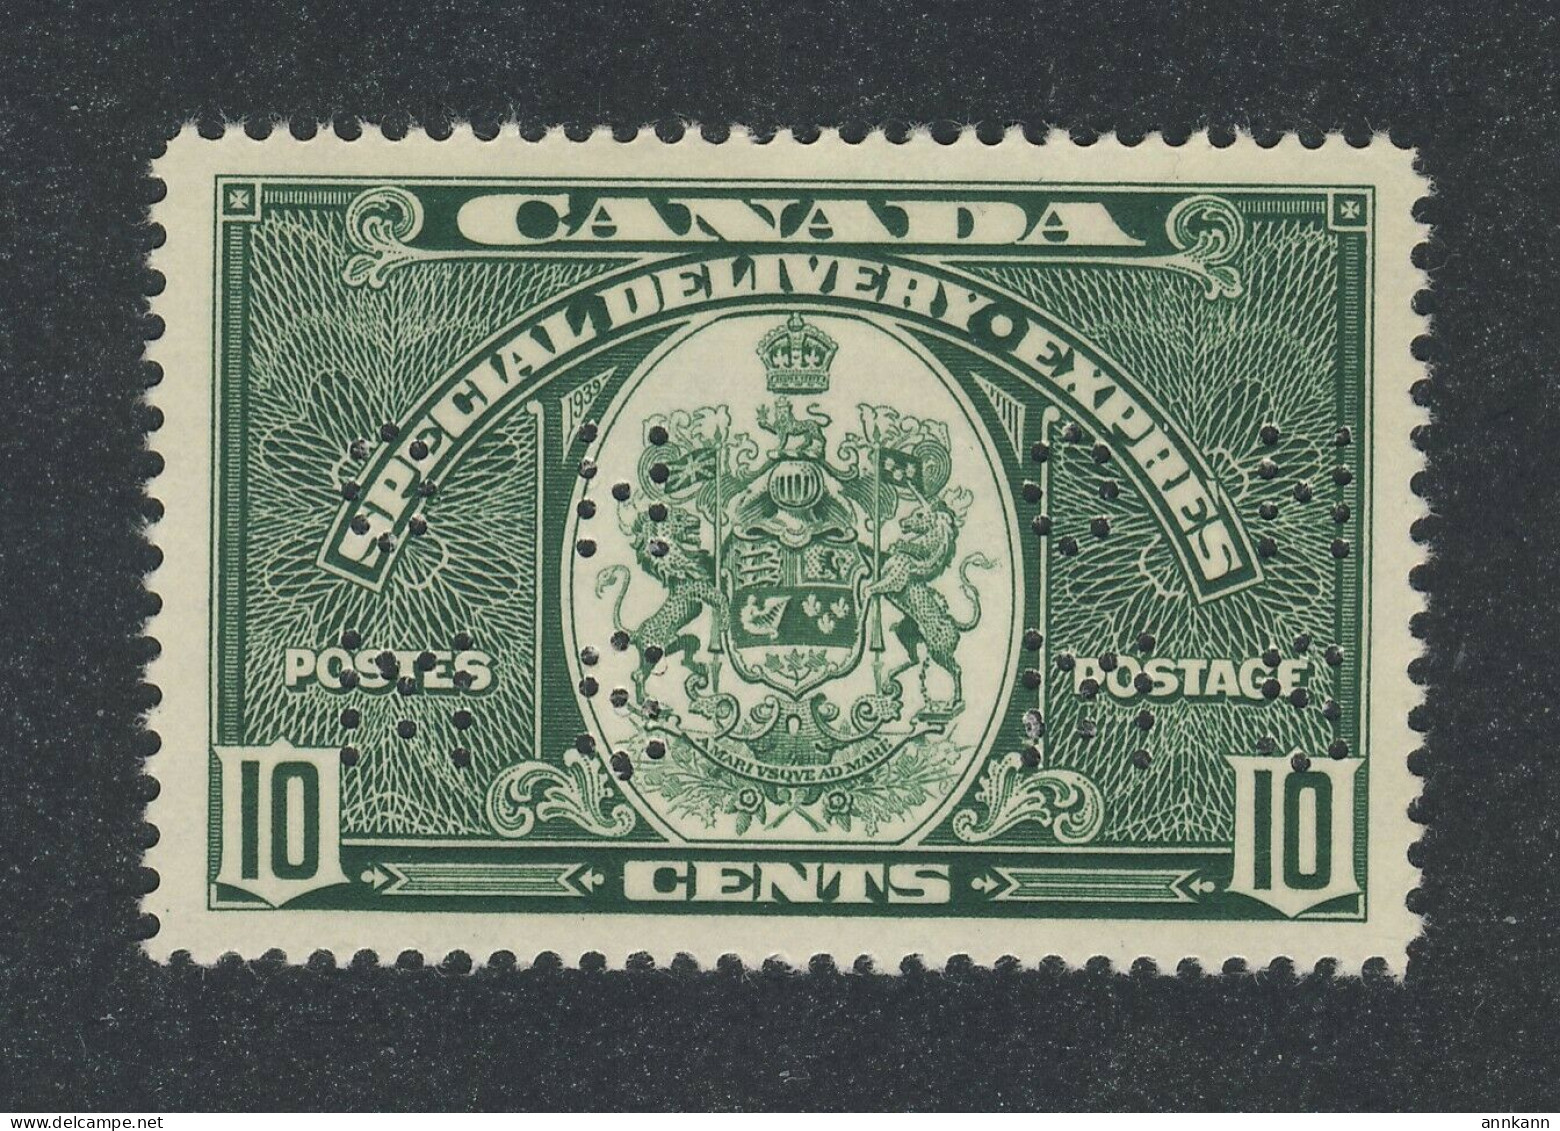 Canada Special Delivery Perf-In Stamp #OE7 - 10c Green MH VF GV= $30.00 - Perfin